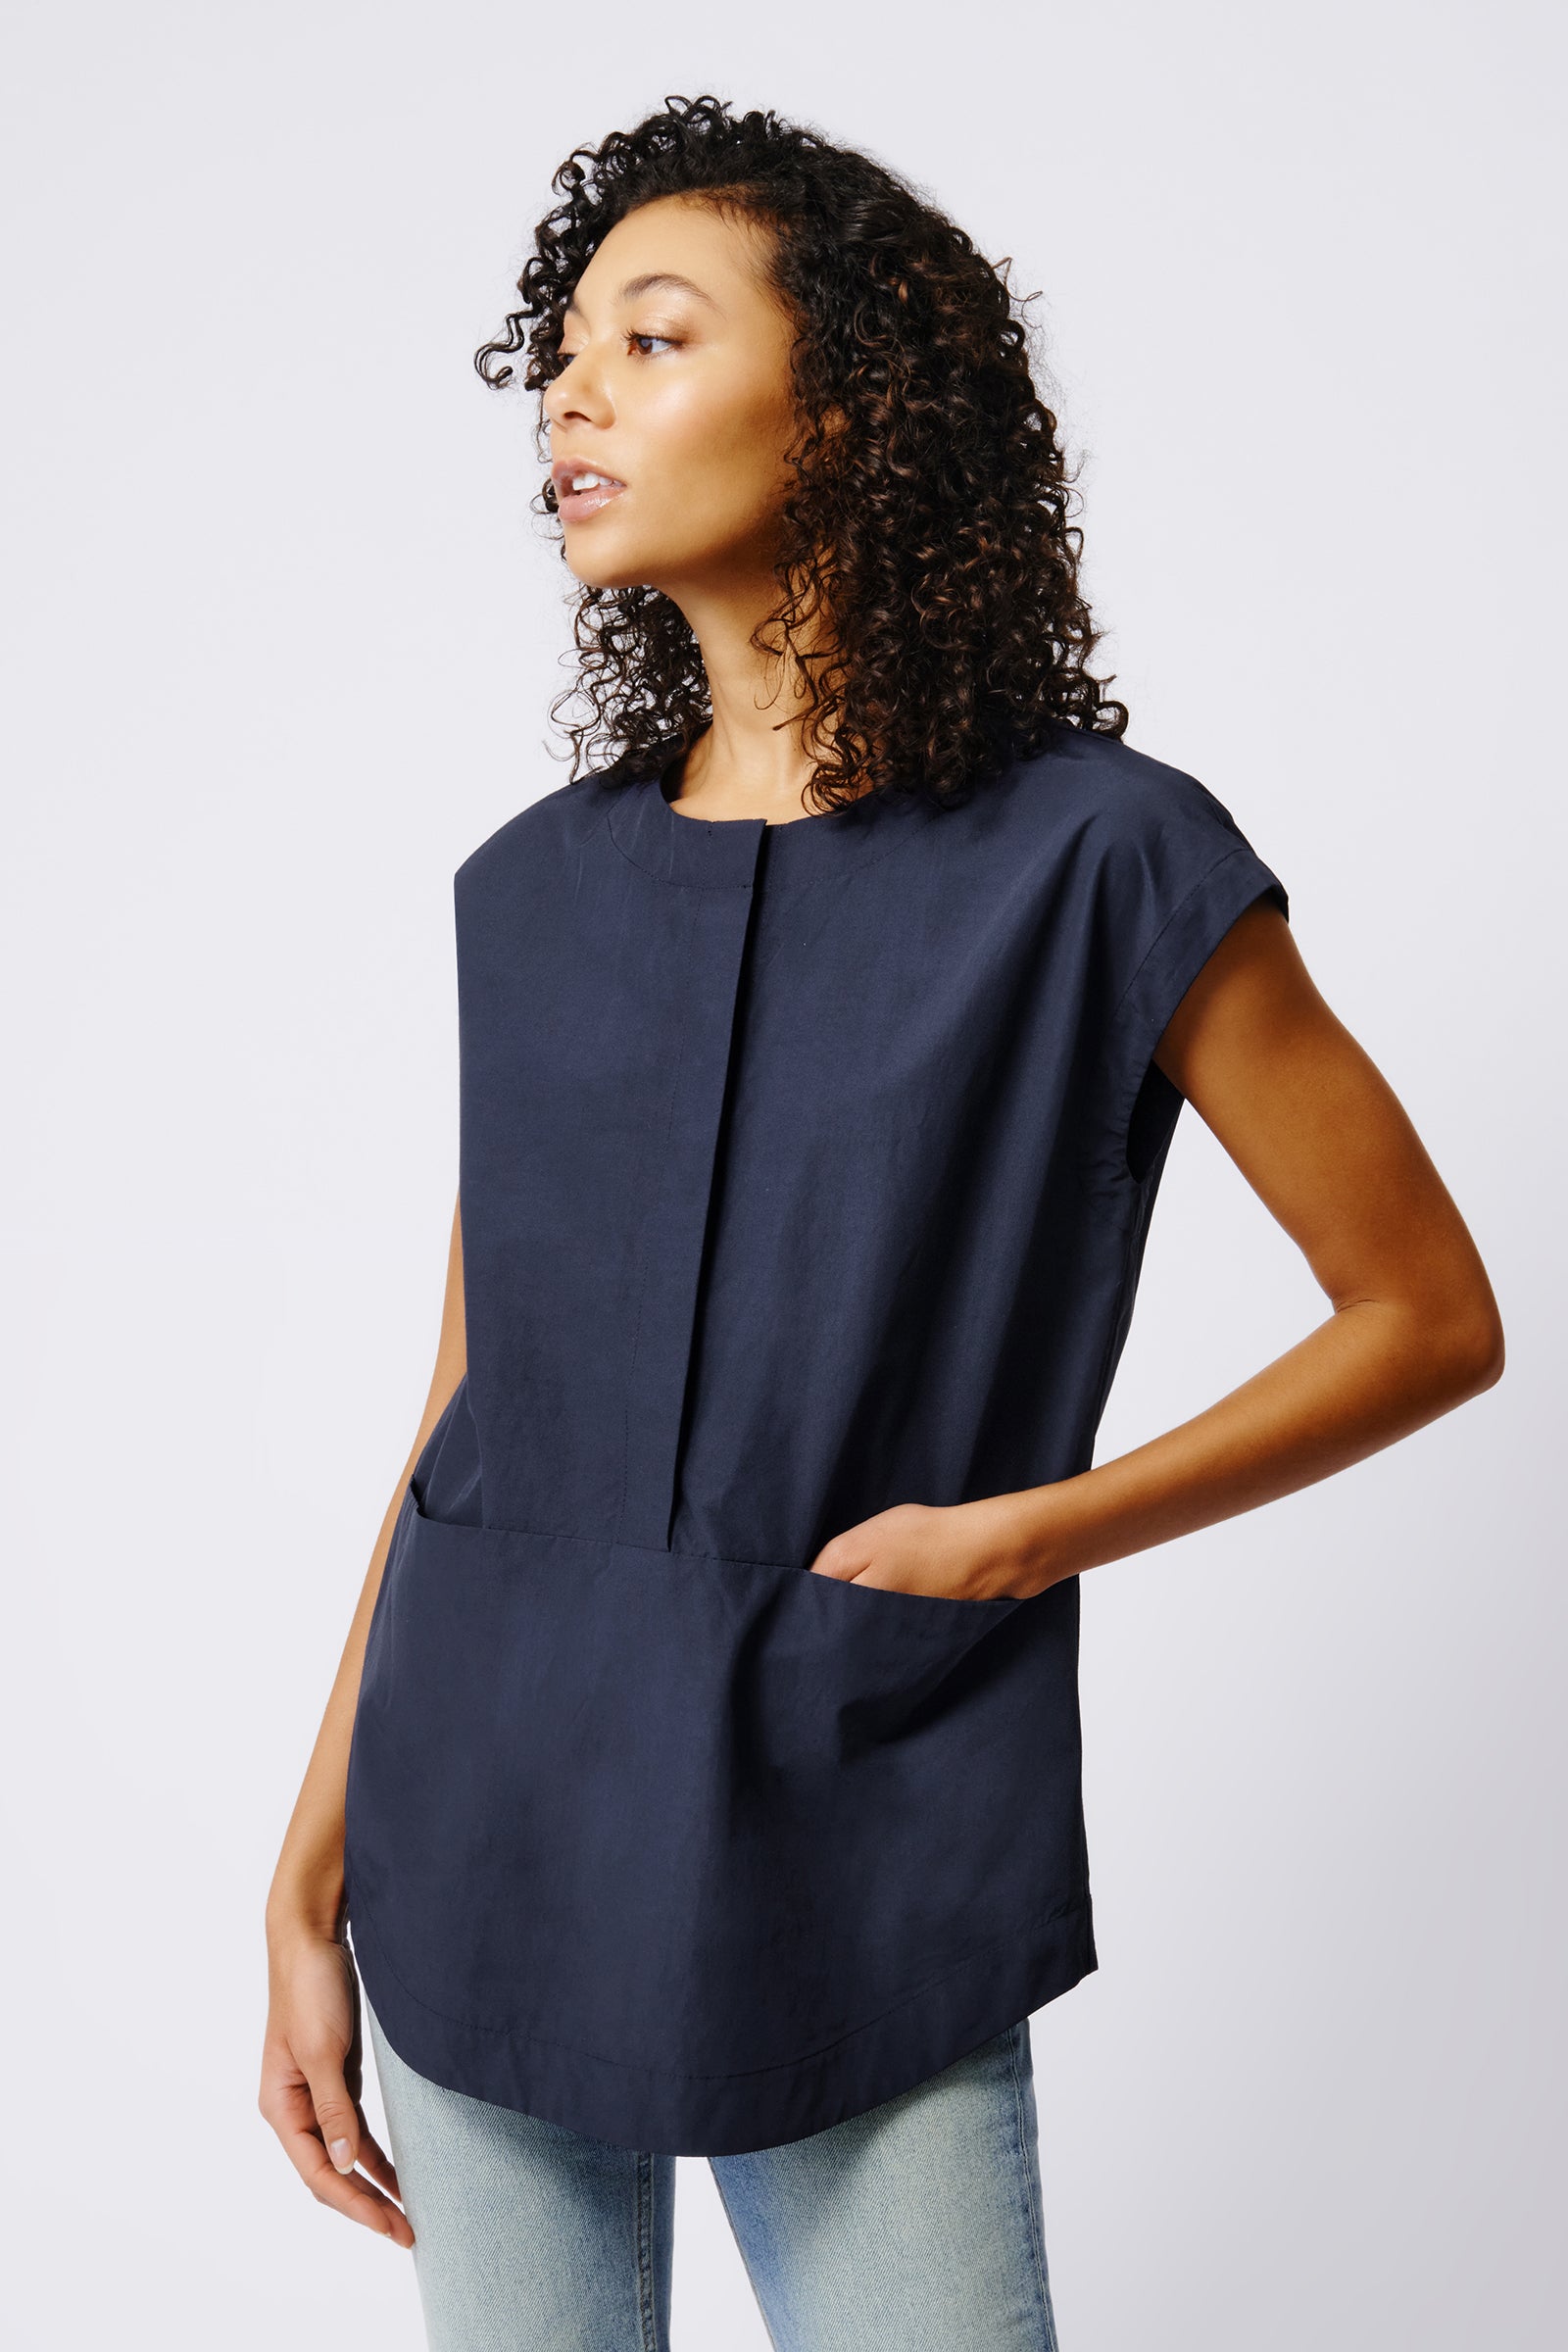 Kal Rieman Seam Pocket Tunic in Navy Broadcloth on Model Front View Crop 2